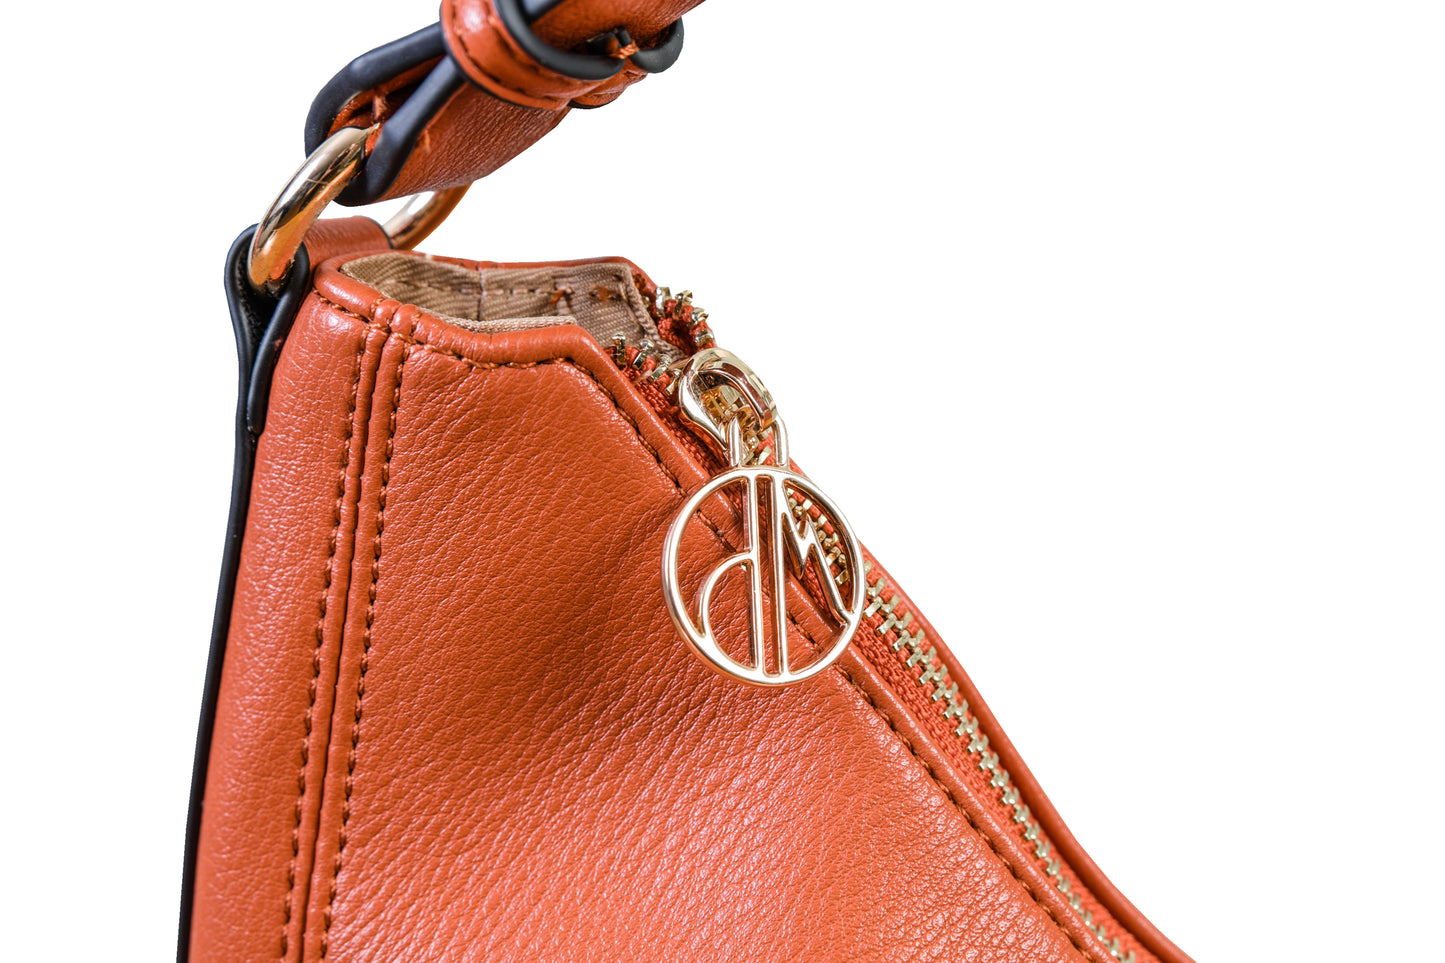 Luna Orange Sunset Crescent Pebble Grain Faux Leather Handbag made by Dewi Maya gold zipper pull available at the best boutique in Upstate South Carolina Spartanburg Greenville Dewi Maya Boutique